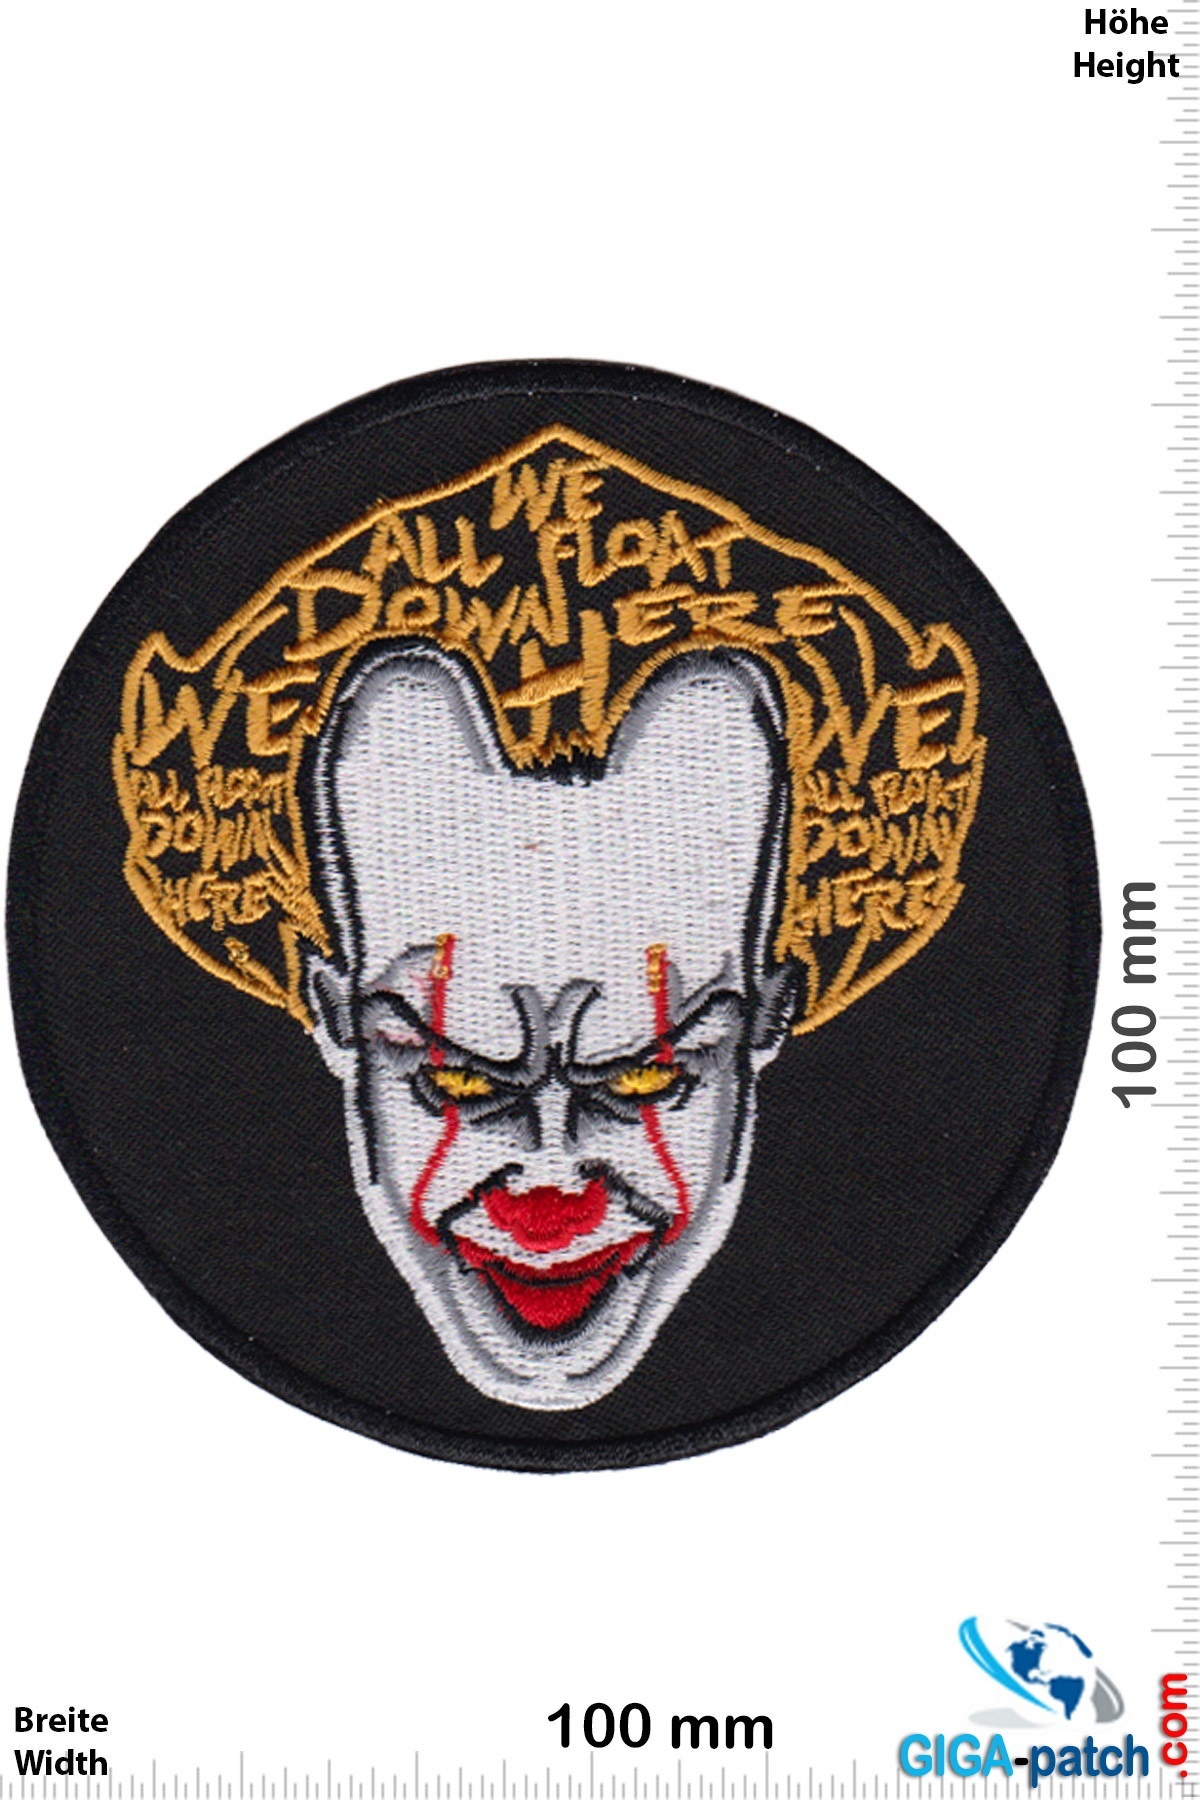 Pennywise  Steven King - It 2 -Pennywise  - Clown